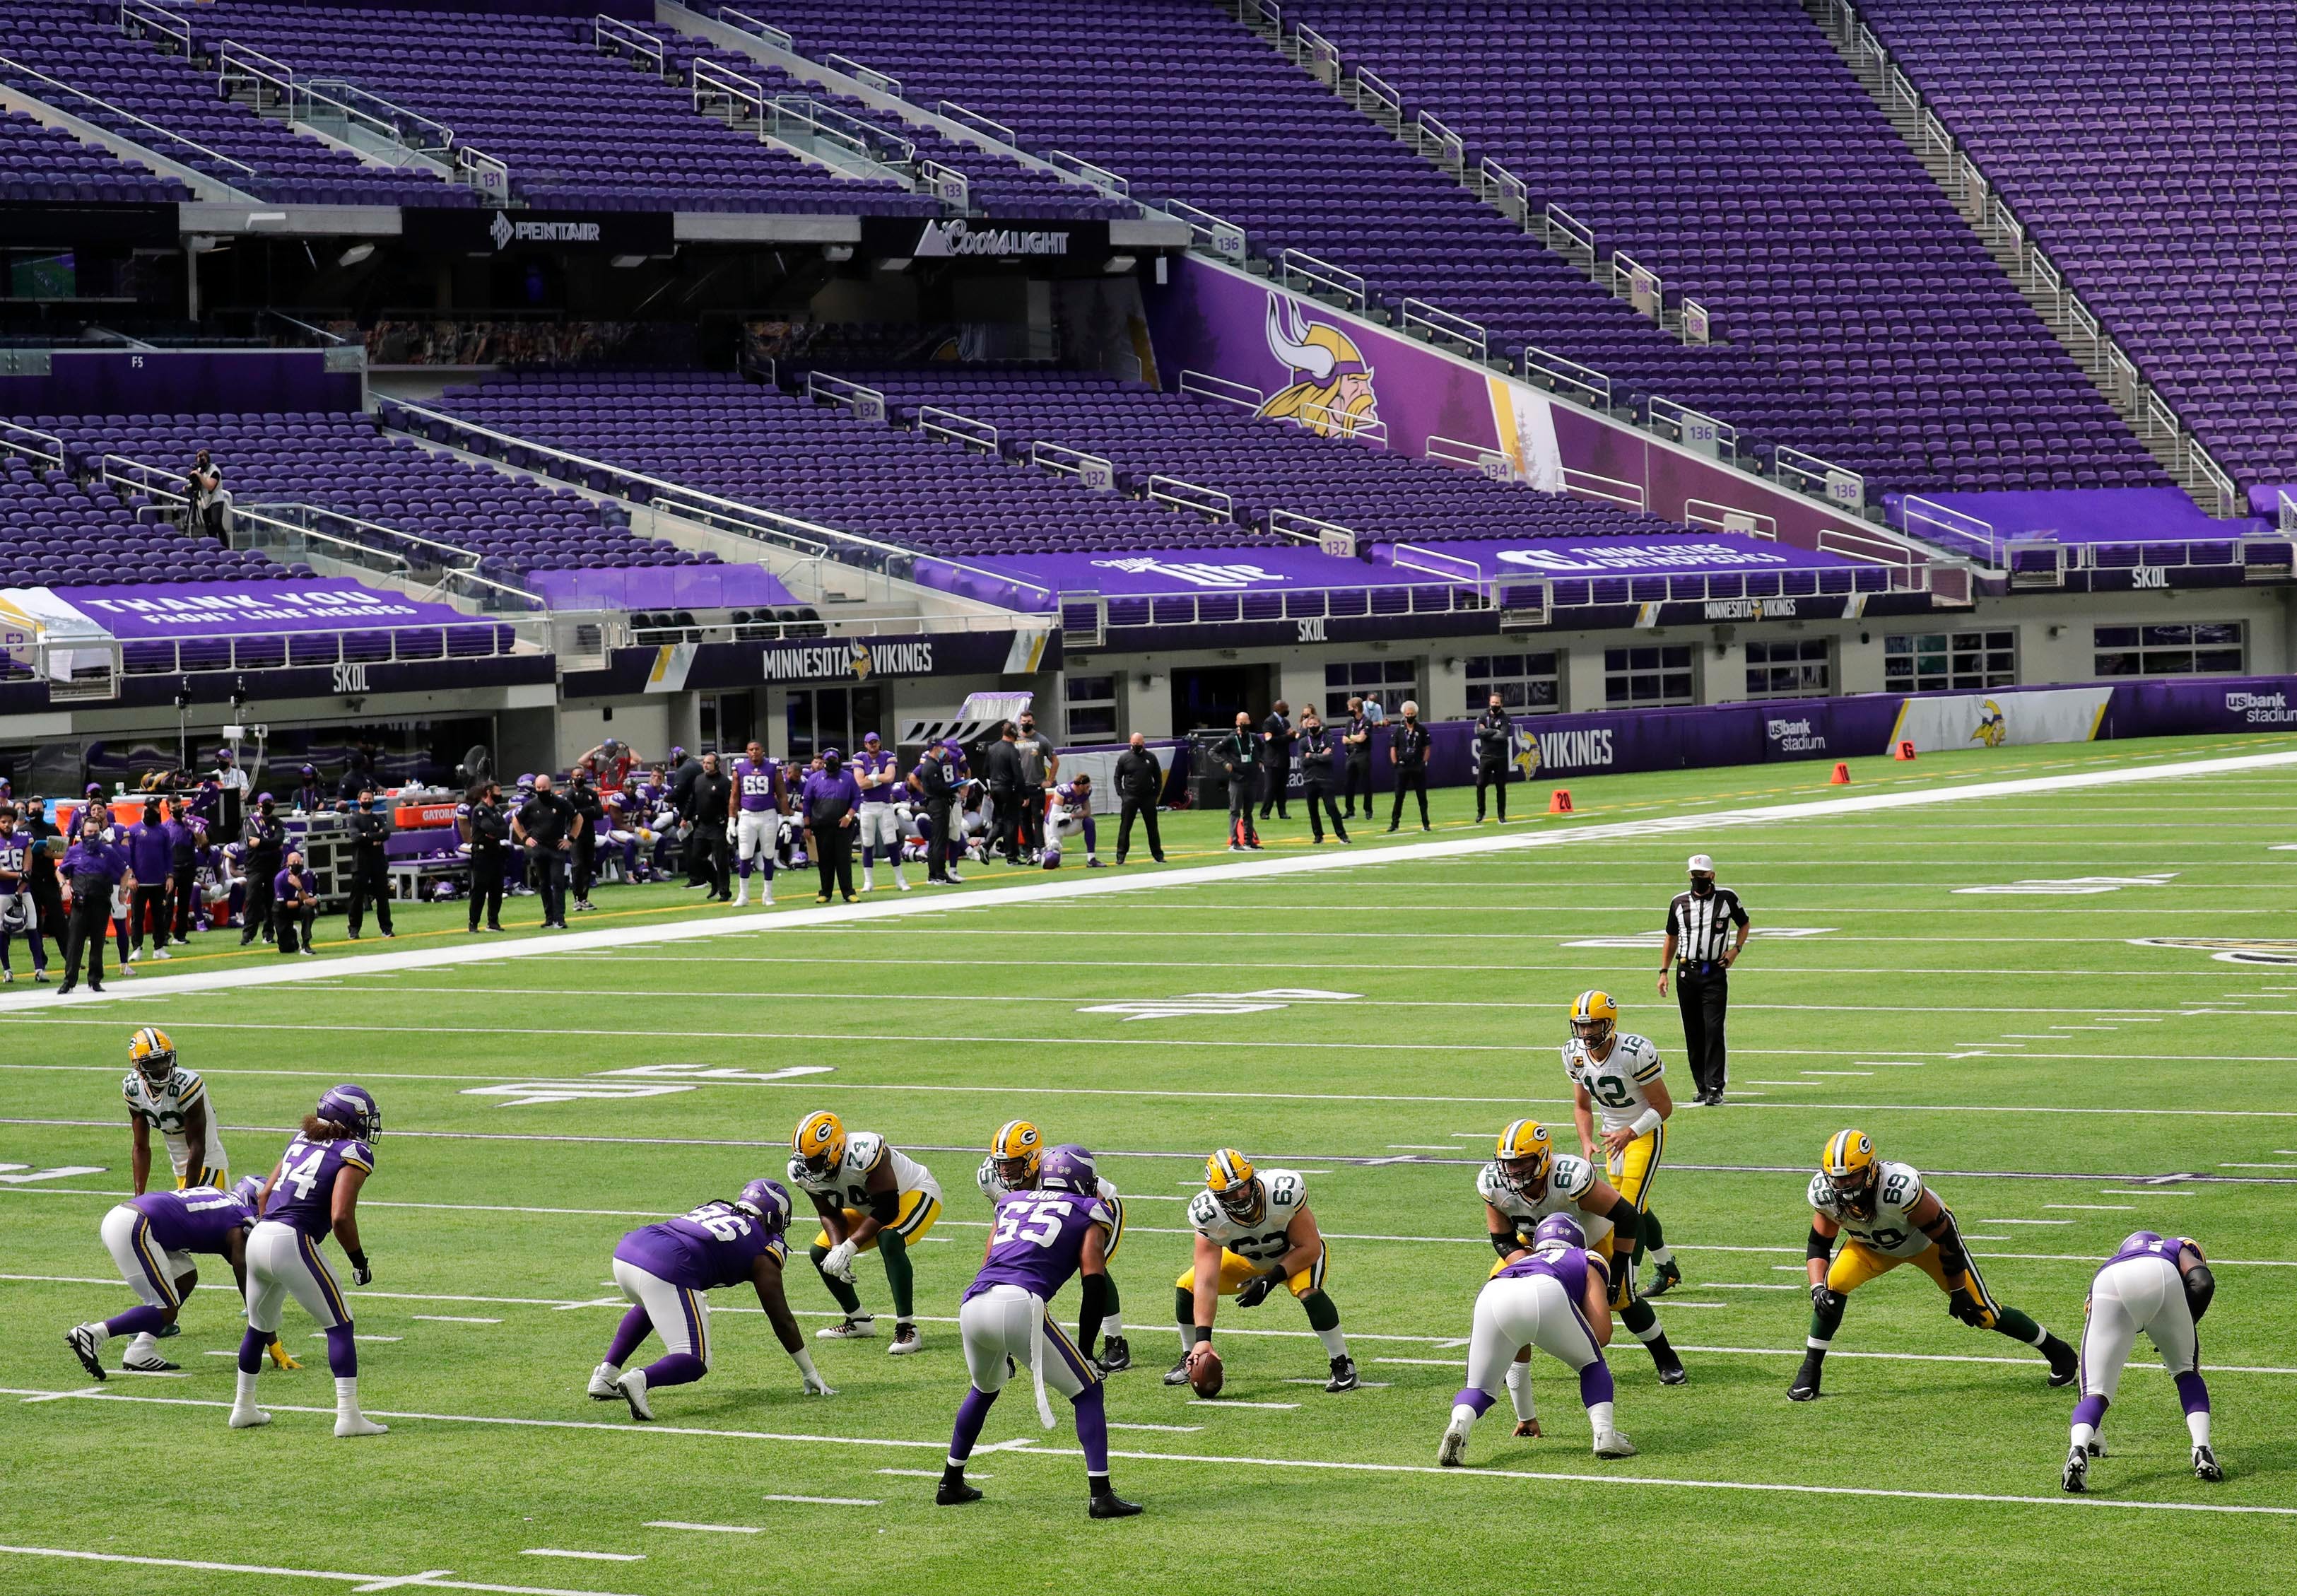 The Green Bay Packers play the Minnesota Vikings on Sept. 13 at U.S. Bank Stadium sans fans in Minneapolis.